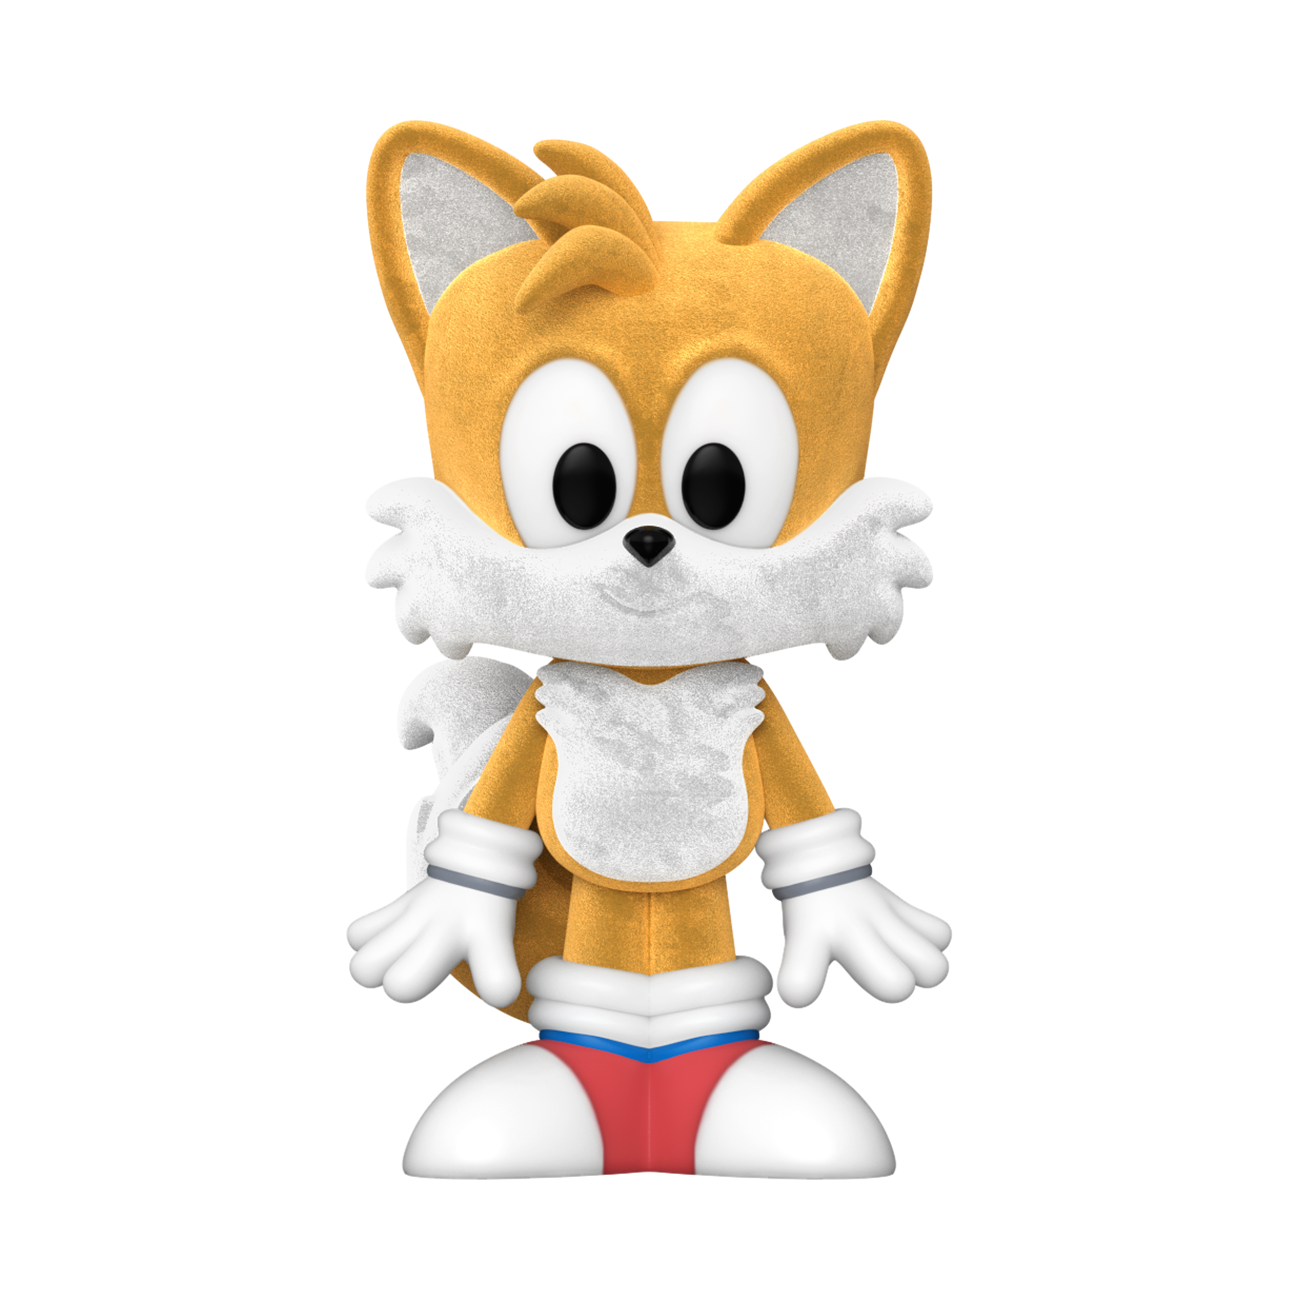 Funko Vinyl SODA: Sonic the Hedgehog Tails (or Chase) 4.05-in Vinyl Figure